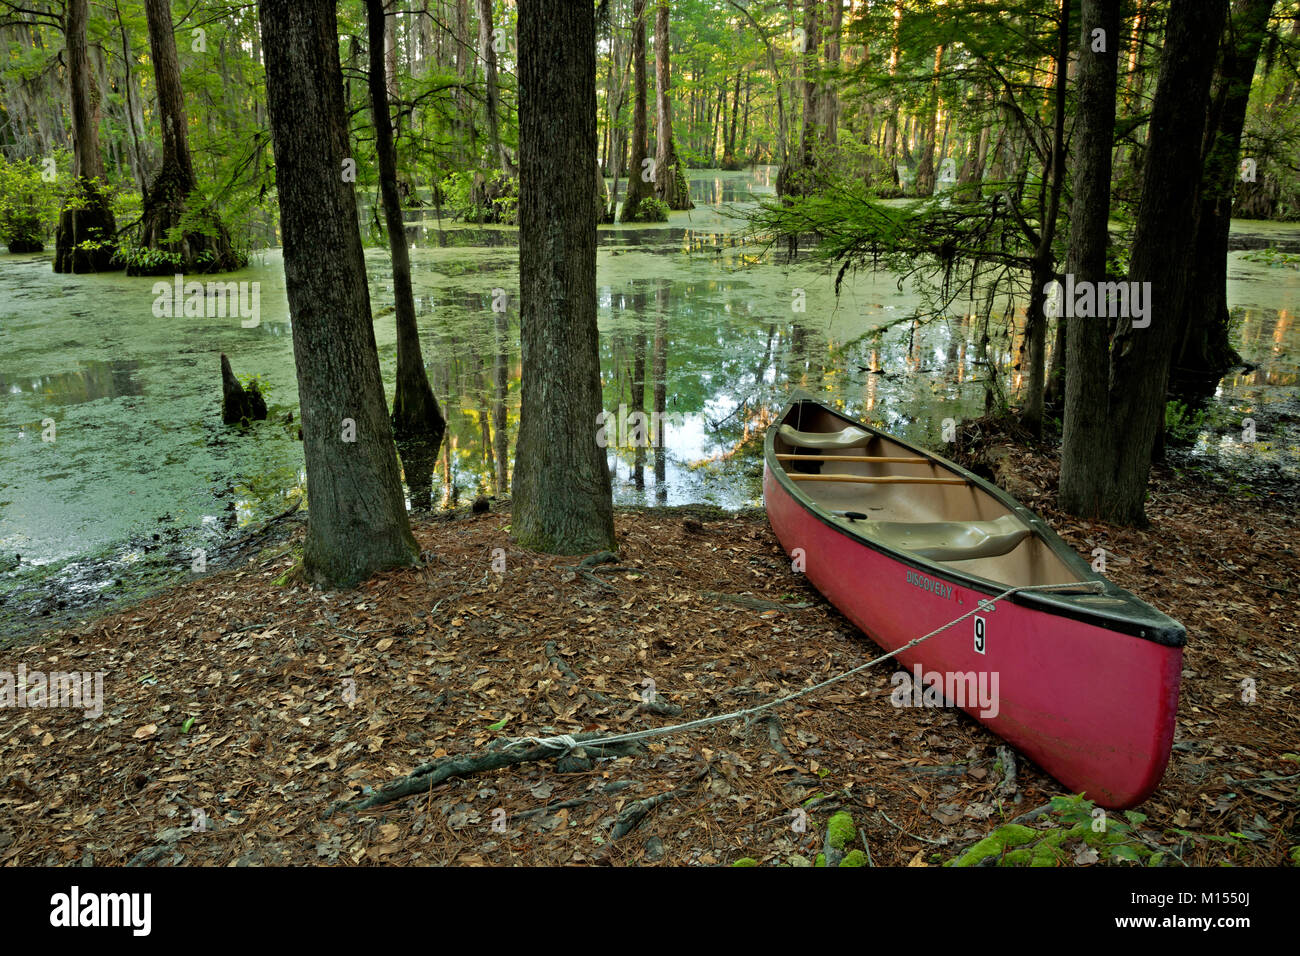 NC01487-00...NORTH CAROLINA - Canoe beached at backcountry campsite in the cypress swamp of Merchant Millpond State Park. Stock Photo